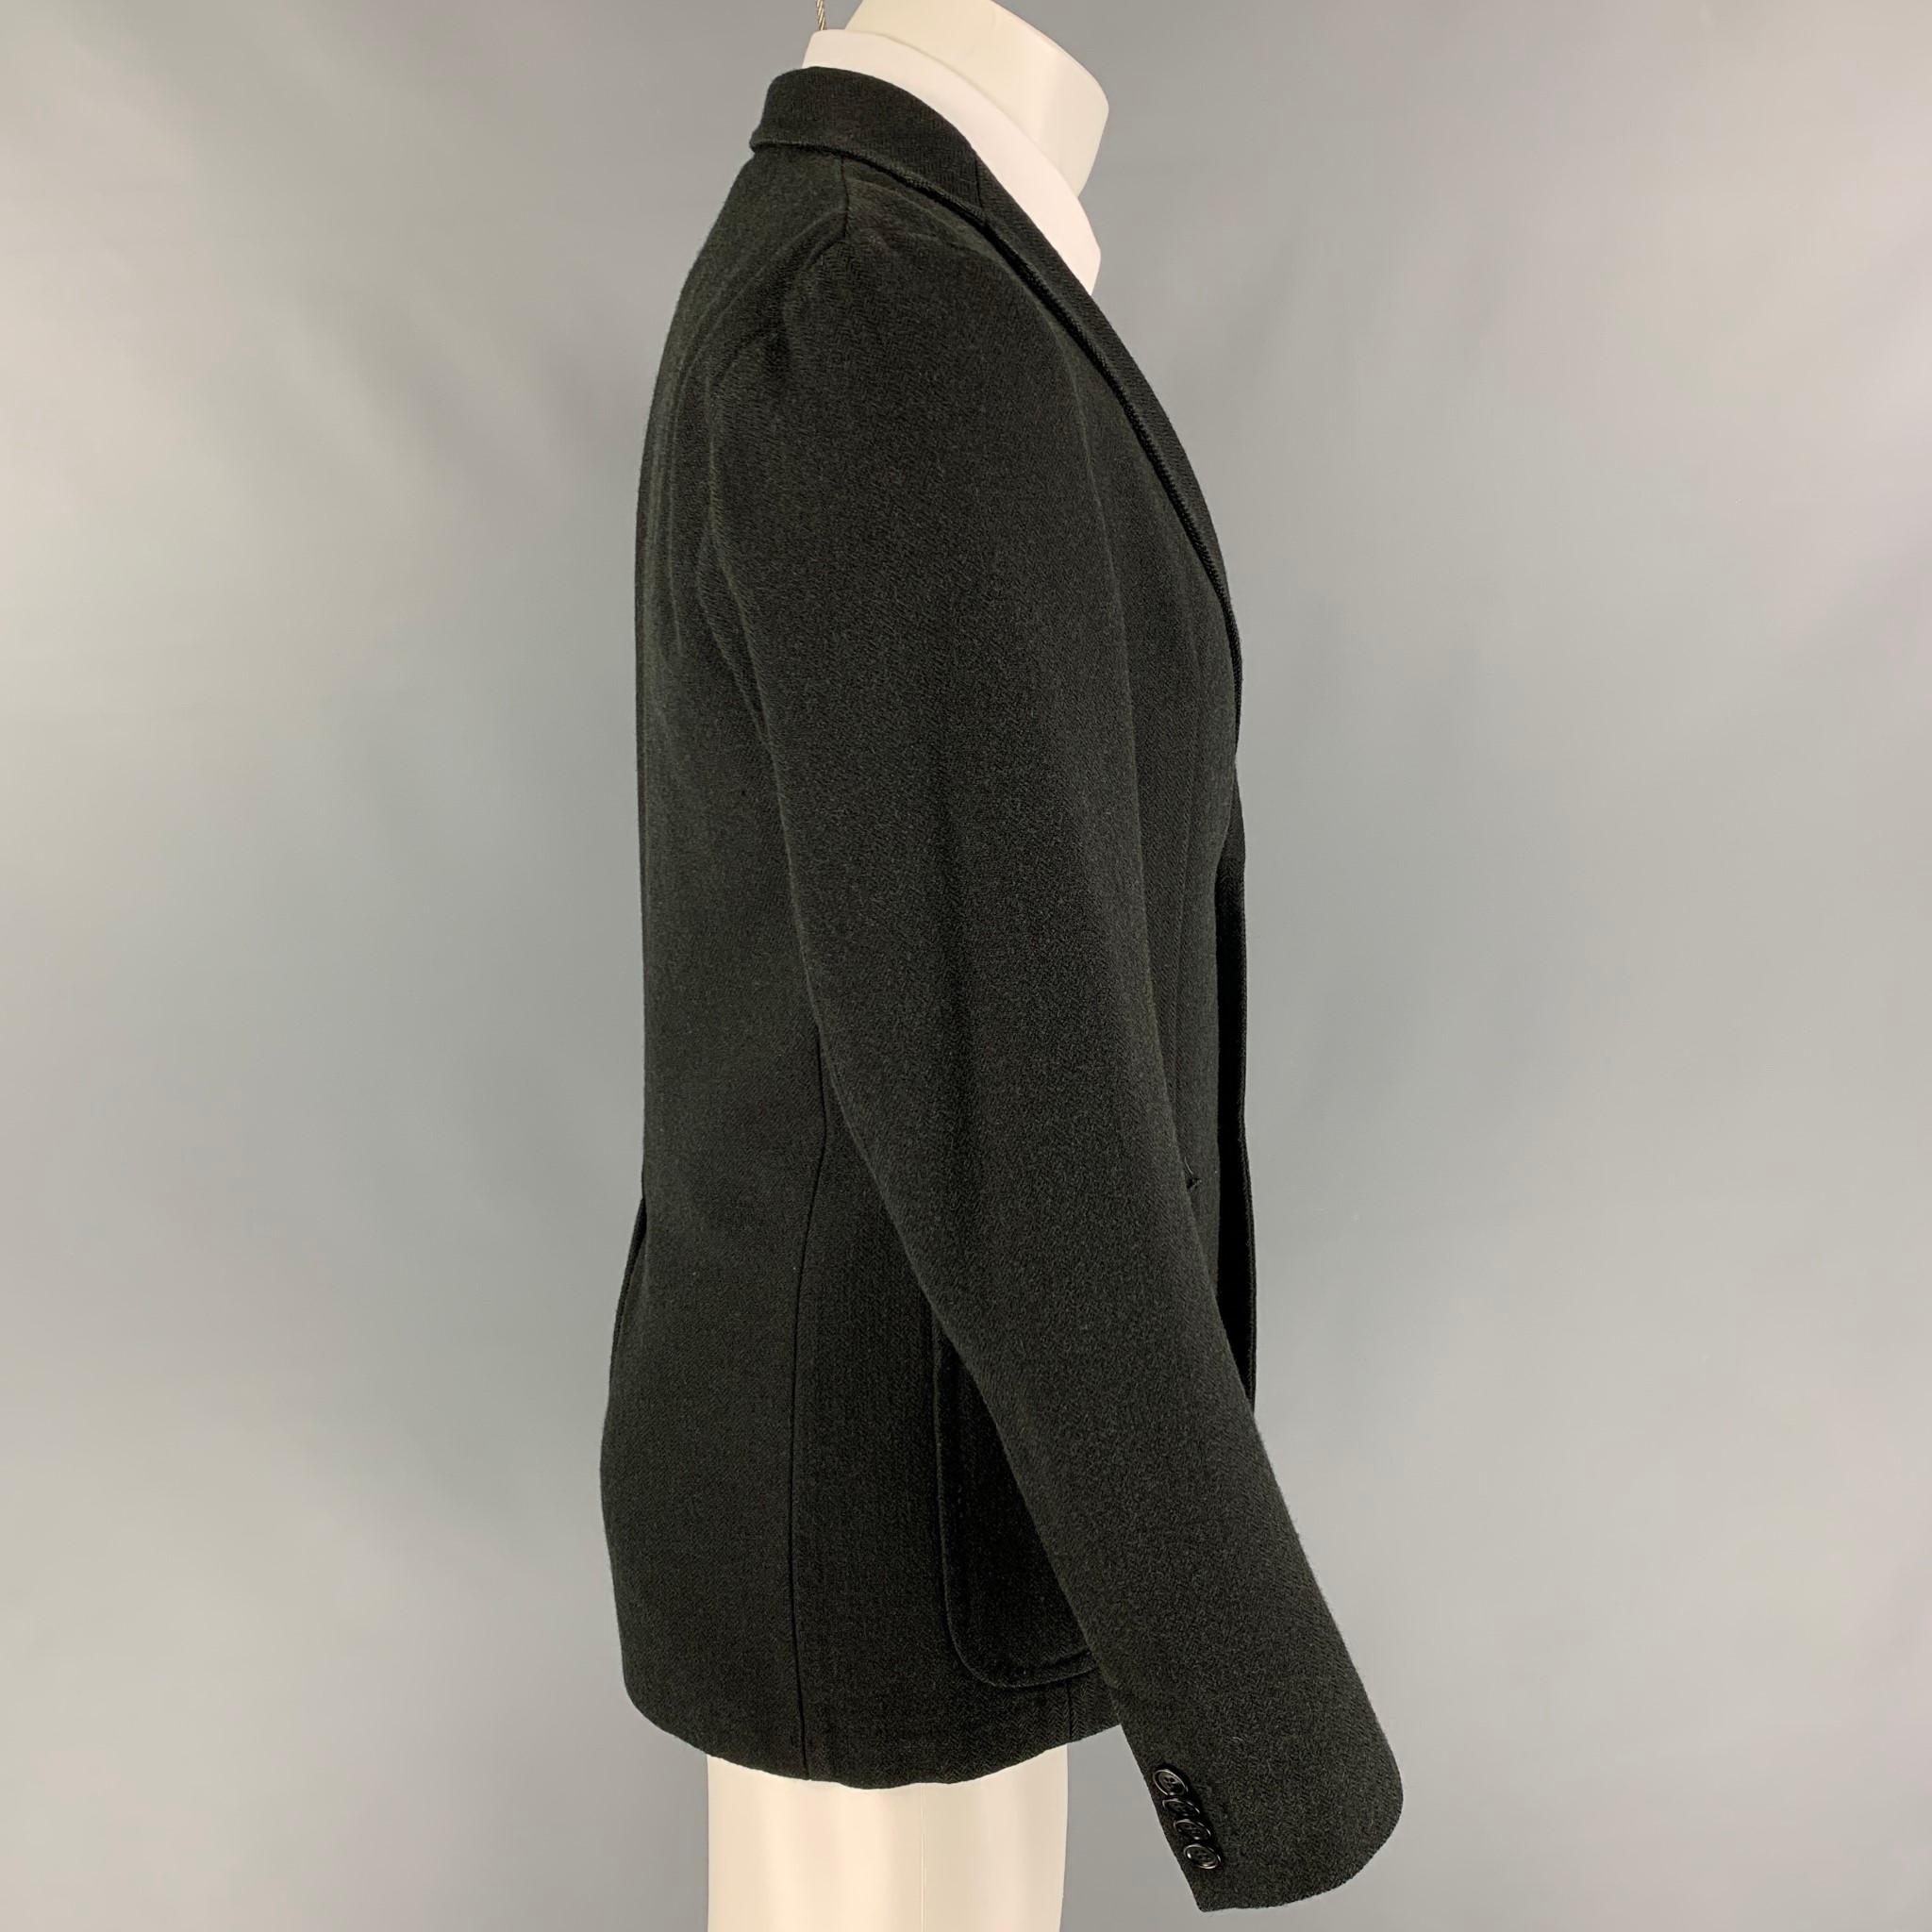 SPORTSWEAR COMPANY S.P.A sport coat comes in a black herringbone wool with a full liner featuring a notch lapel, patch pockets, single back vent, and a double button closure. Made in Italy. 

Very Good Pre-Owned Condition.
Marked: 48
Original Retail